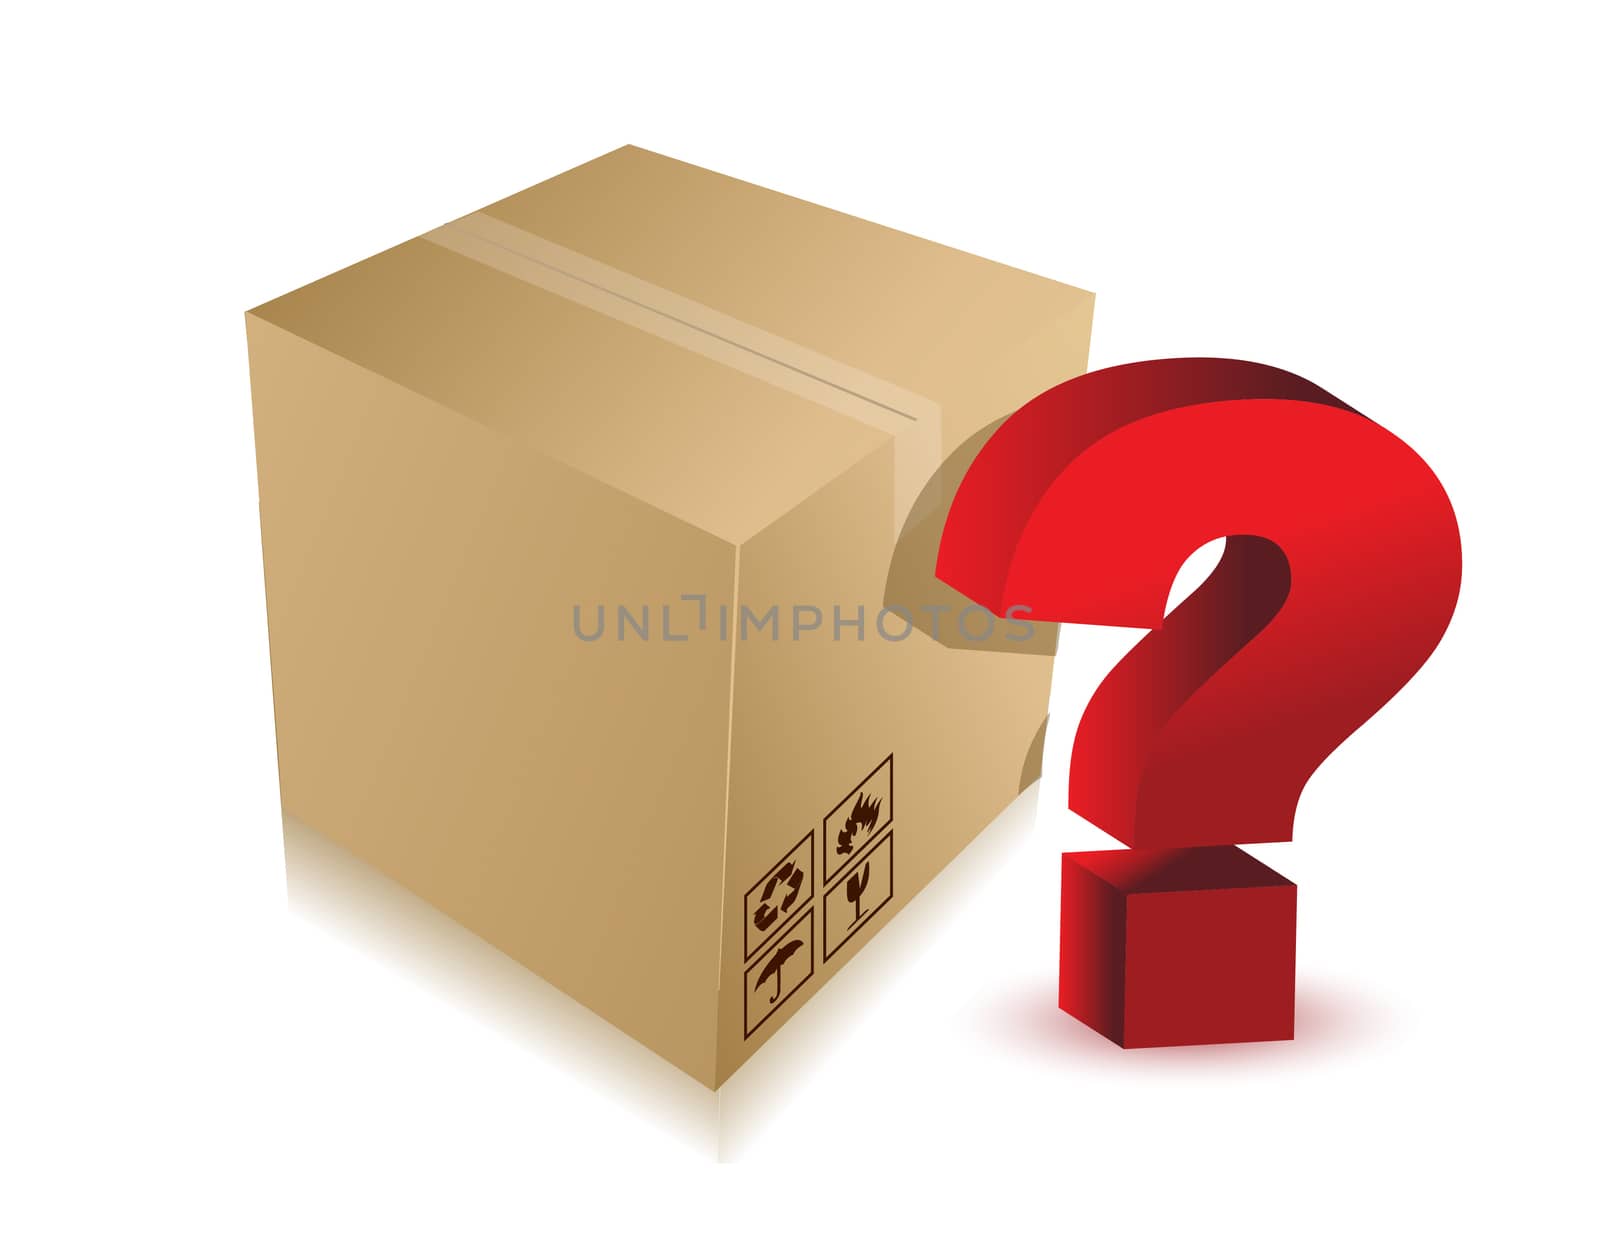 unknown content box with question mark